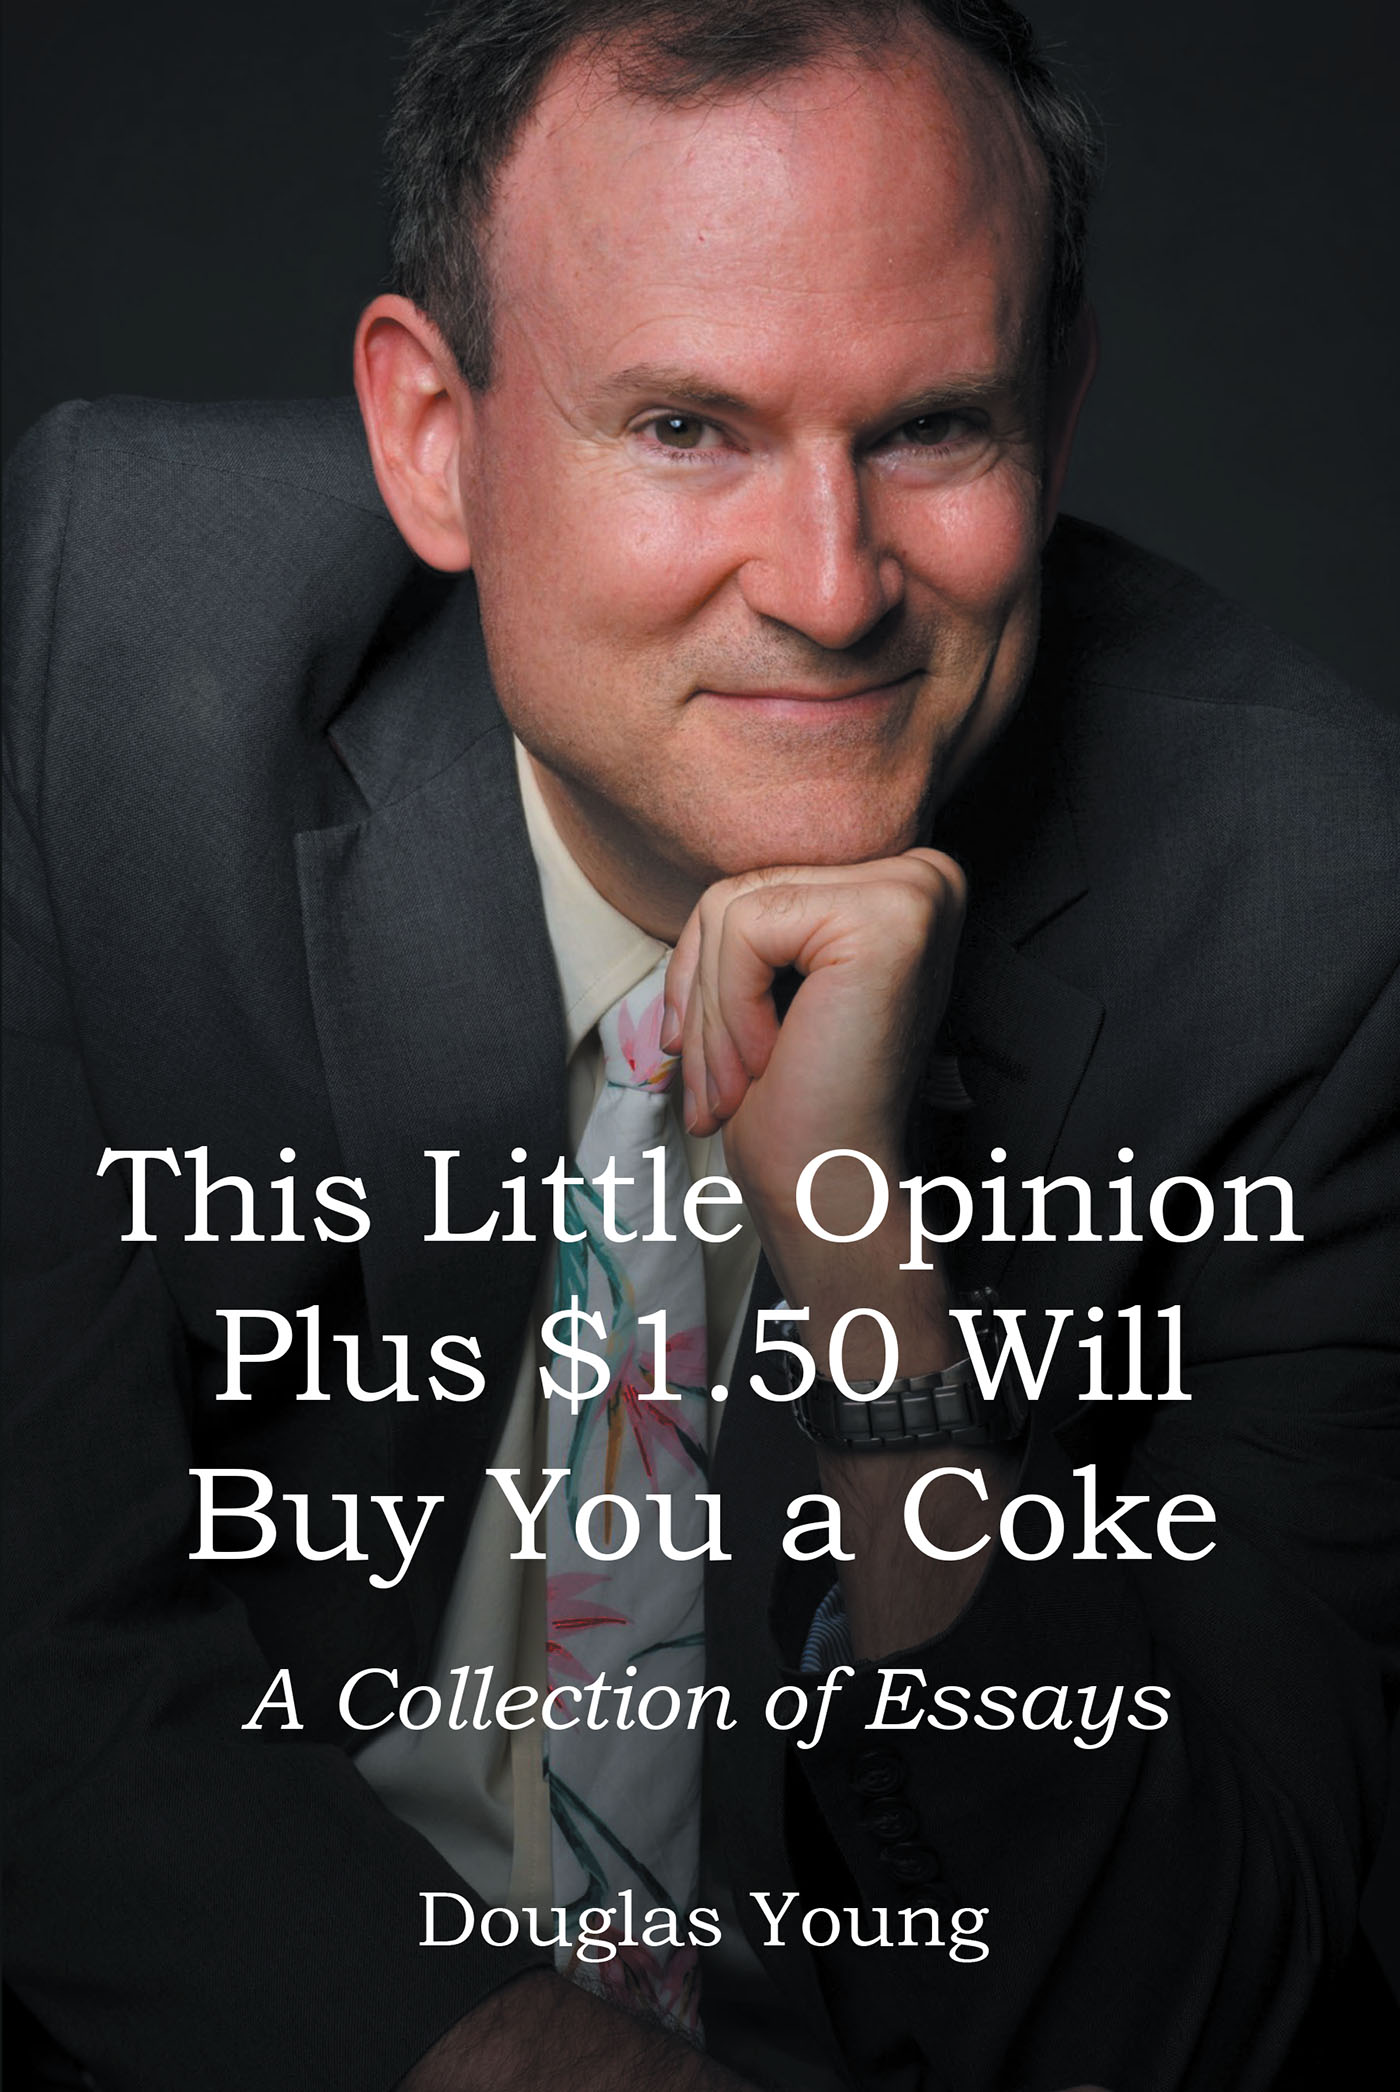 Author Douglas Young’s New Book, “This Little Opinion Plus $1.50 Will Buy You a Coke,” is a Series of Essays Exploring the Author’s Views on American Political Issues